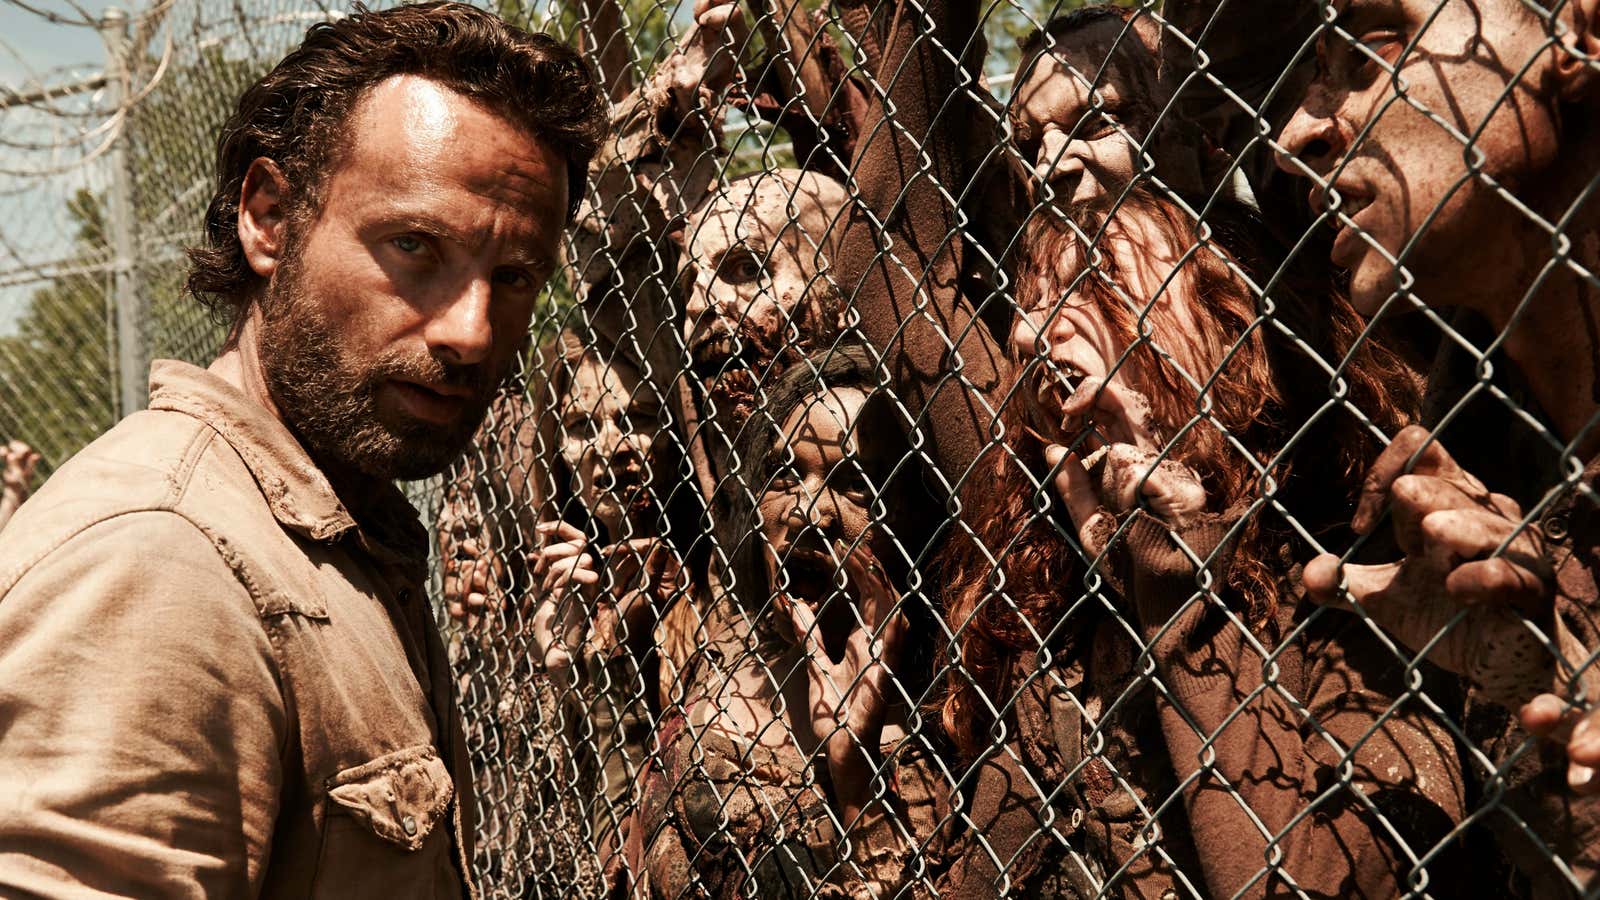 The world is clamoring to watch “The Walking Dead.”